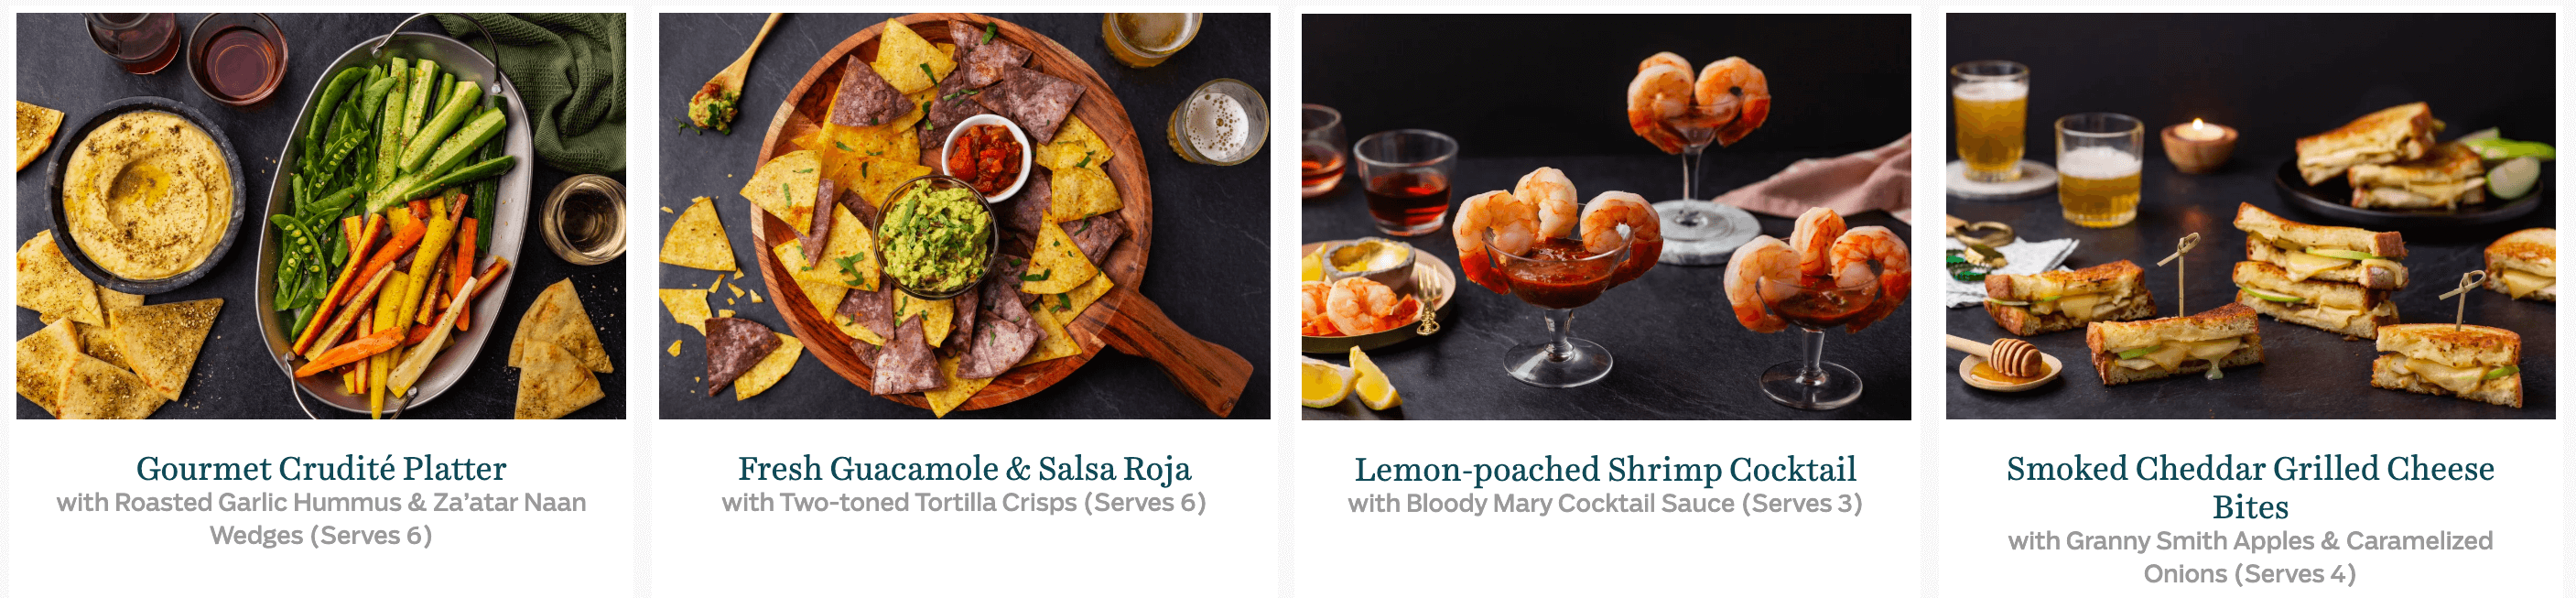 Product images of Goodfood appetizers